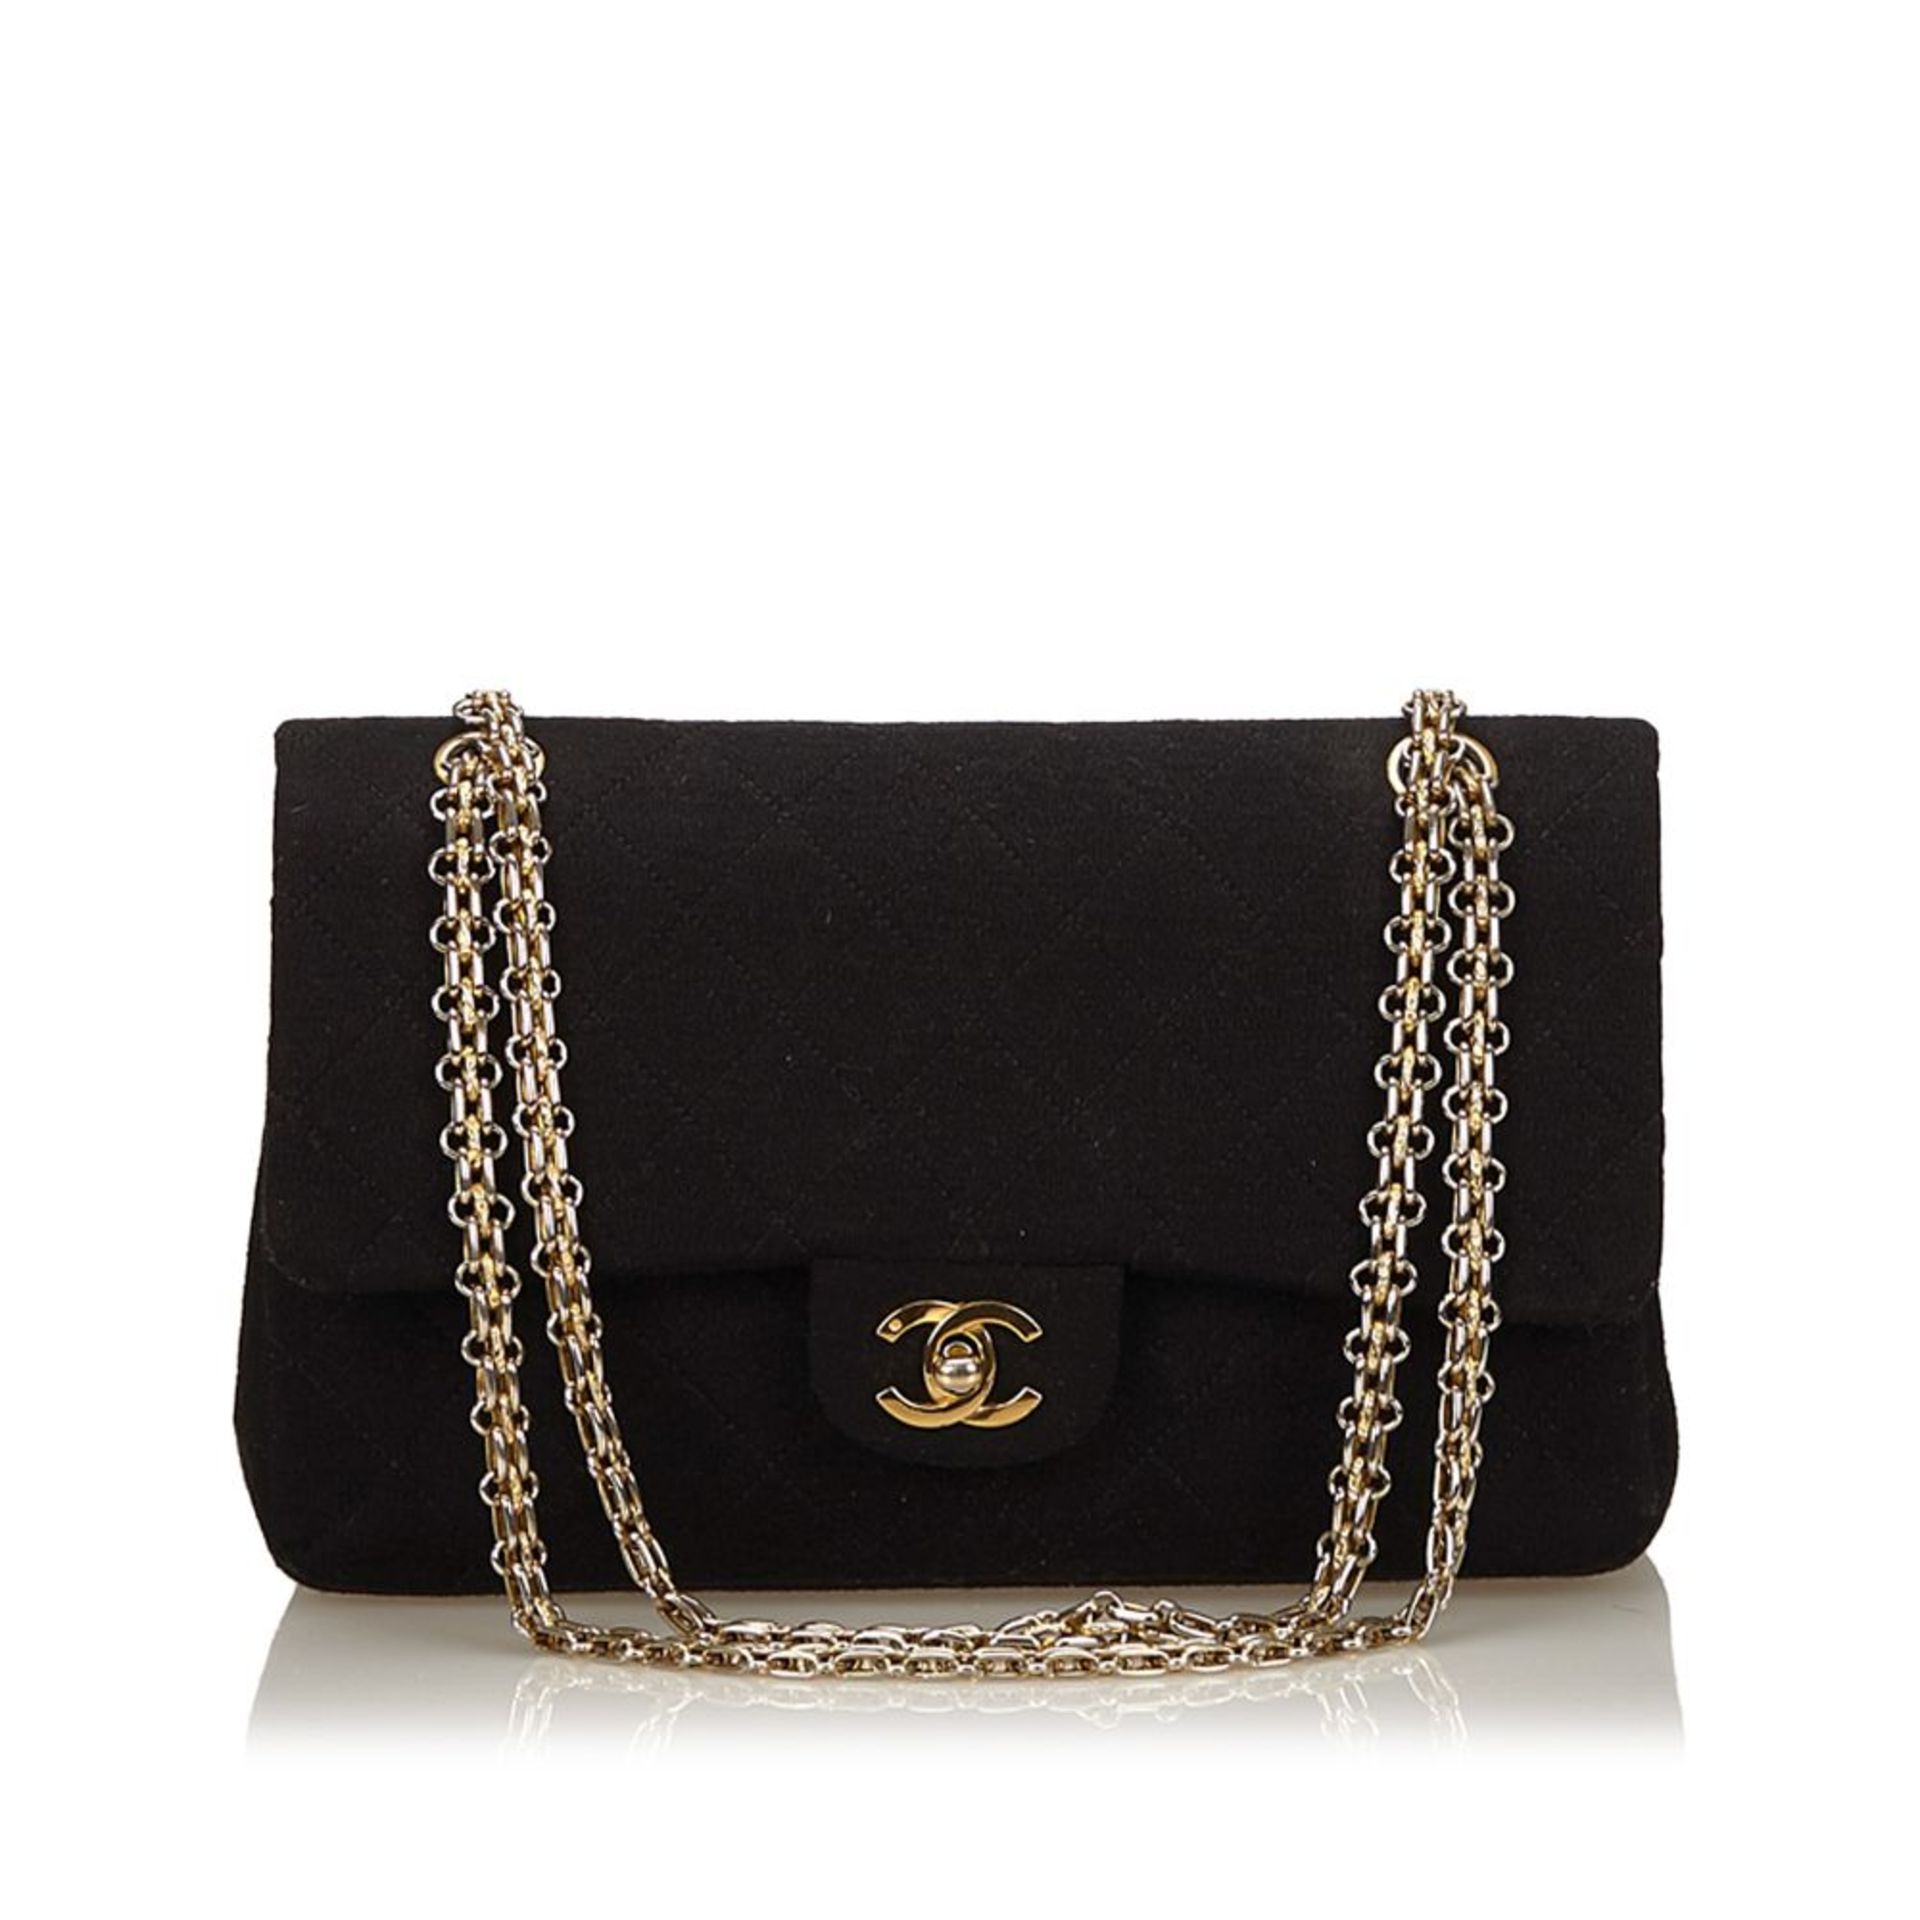 A Chanel classic medium cotton double flap shoulder bag,featuring a quilted cotton body with chain